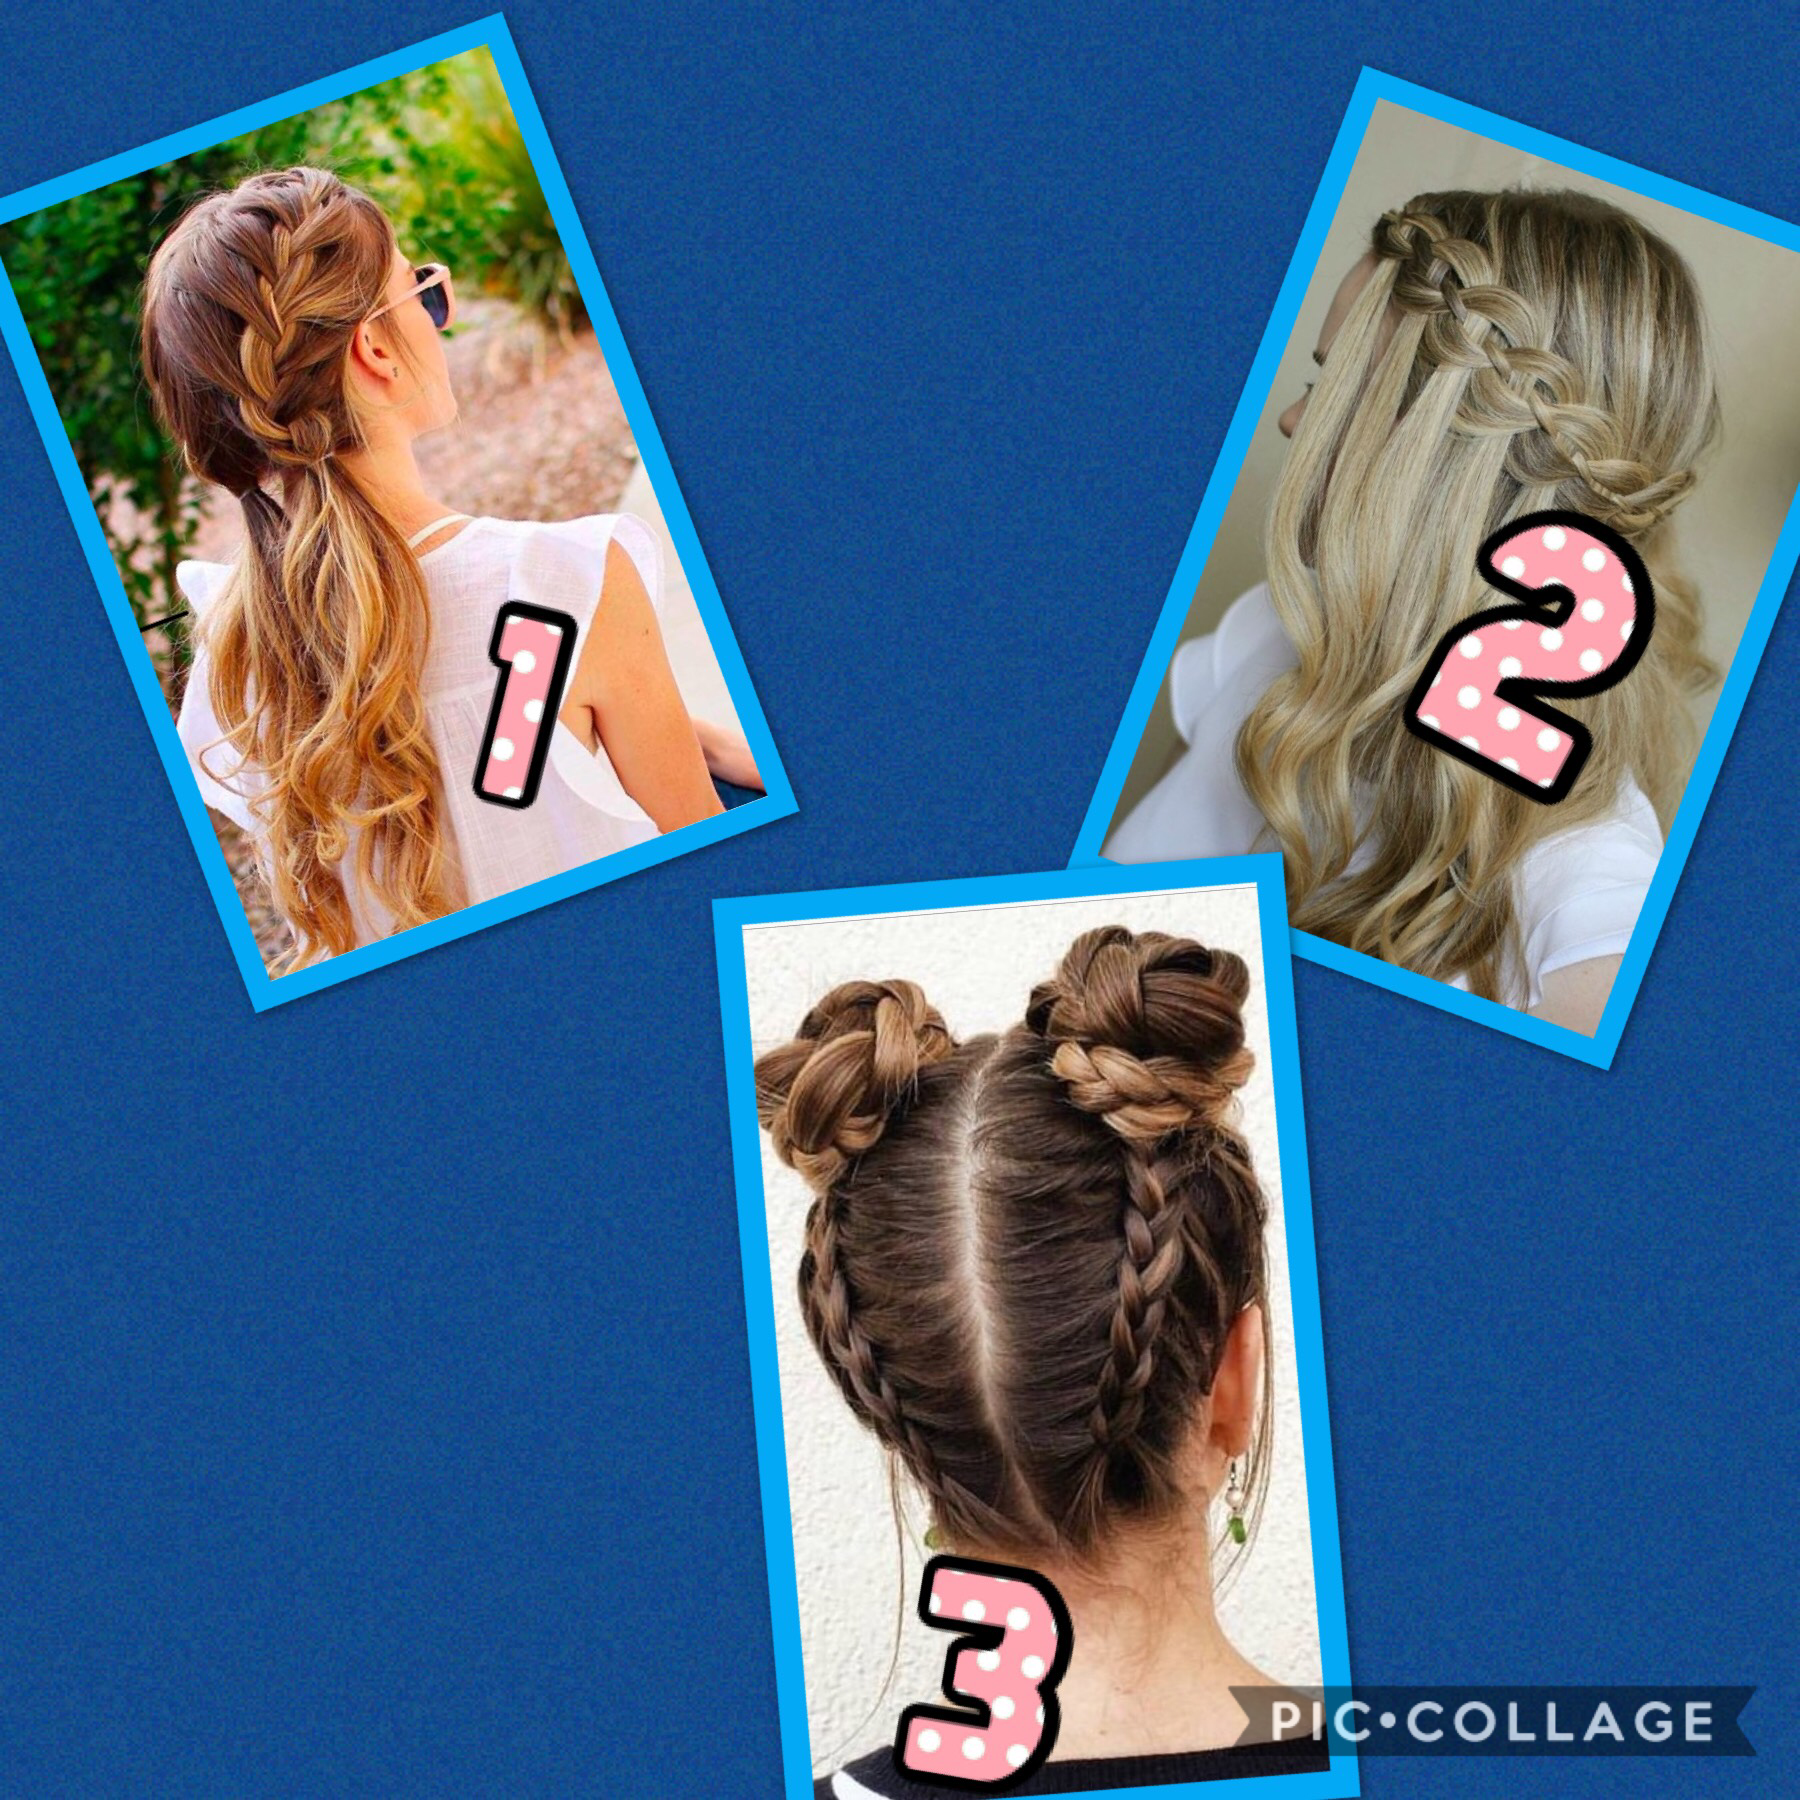 Which hair style would you wear 